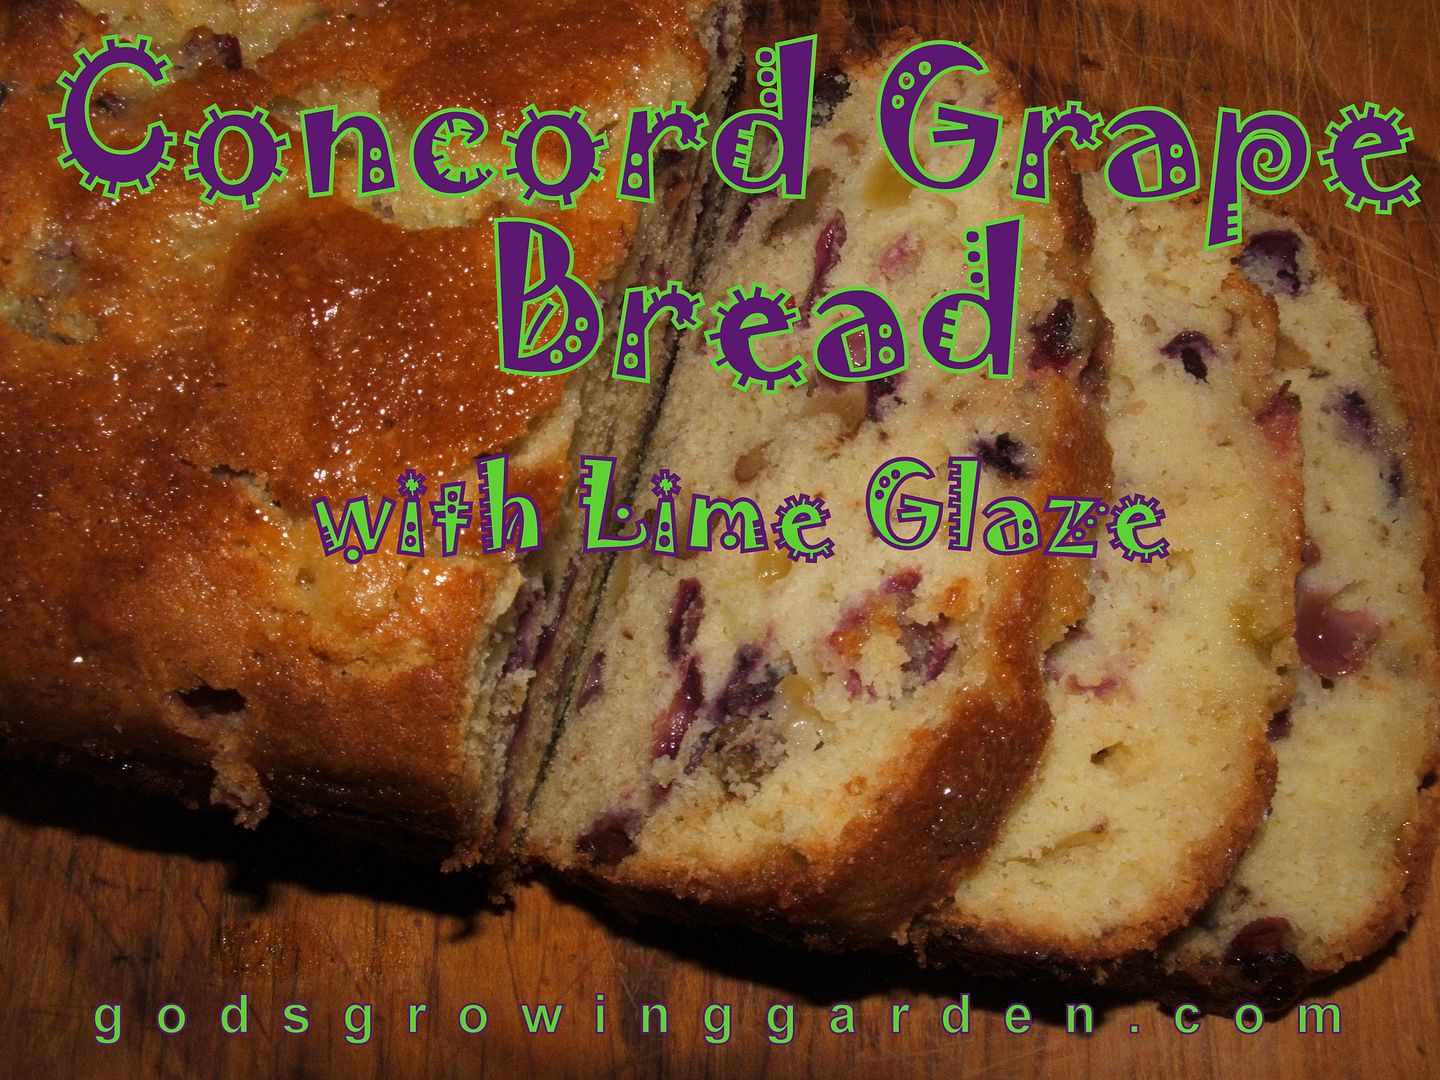 Concord Grape Bread by Angie Ouellette-Tower for godsgrowinggarden.com photo 011_zpsfe324a69.jpg